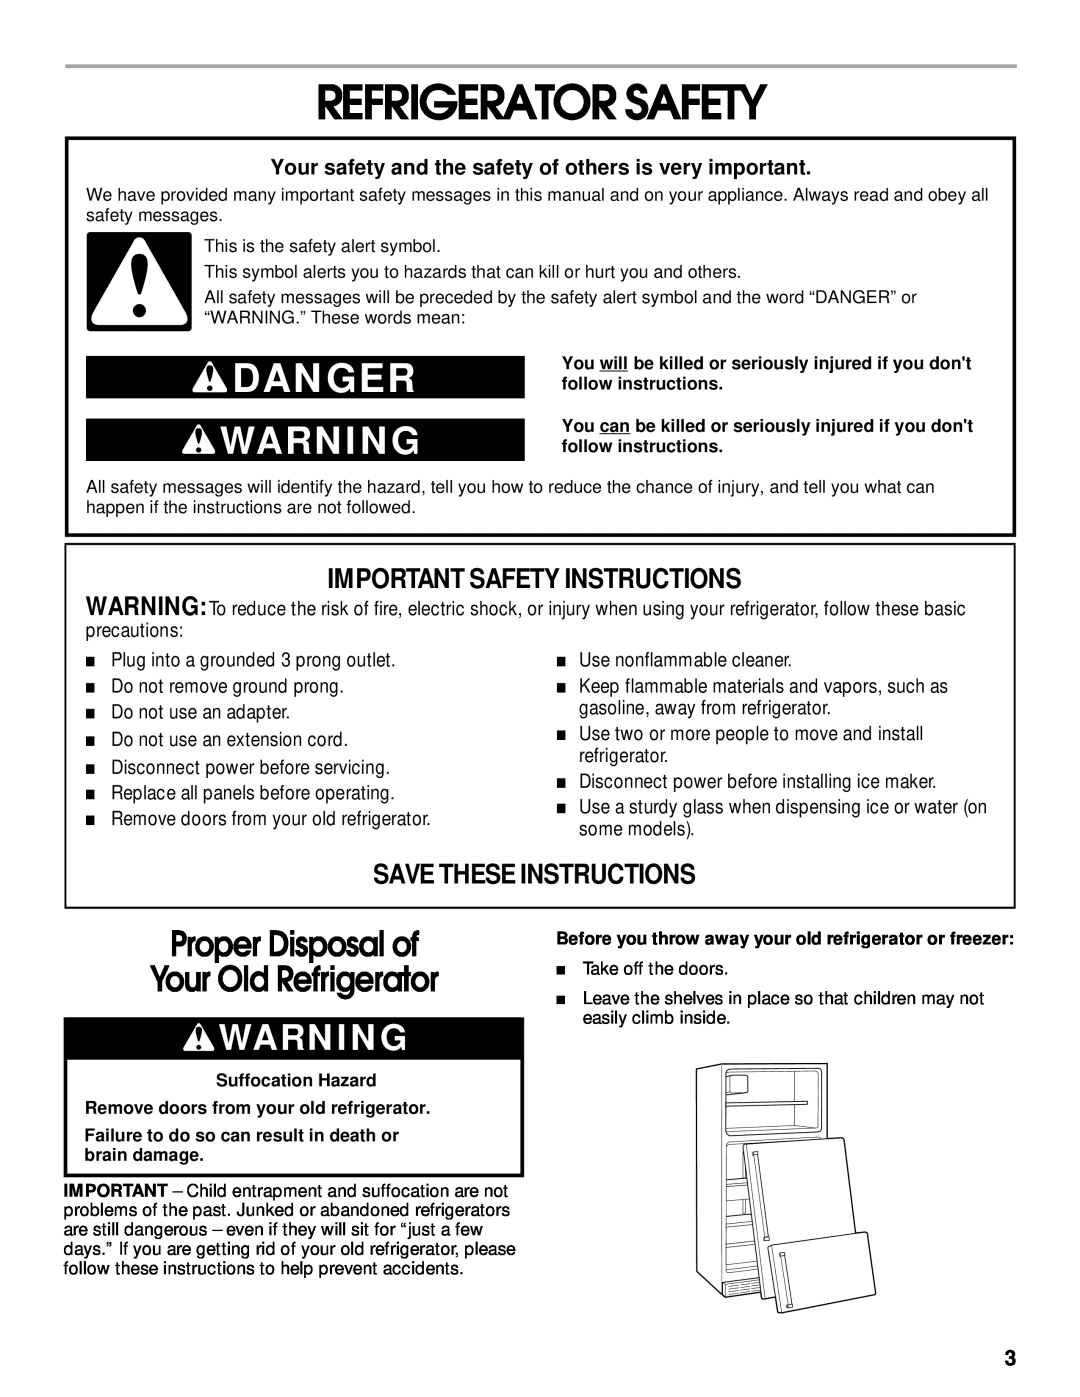 Whirlpool TT14DKXJW00 Refrigerator Safety, Danger, Proper Disposal of Your Old Refrigerator, Important Safety Instructions 